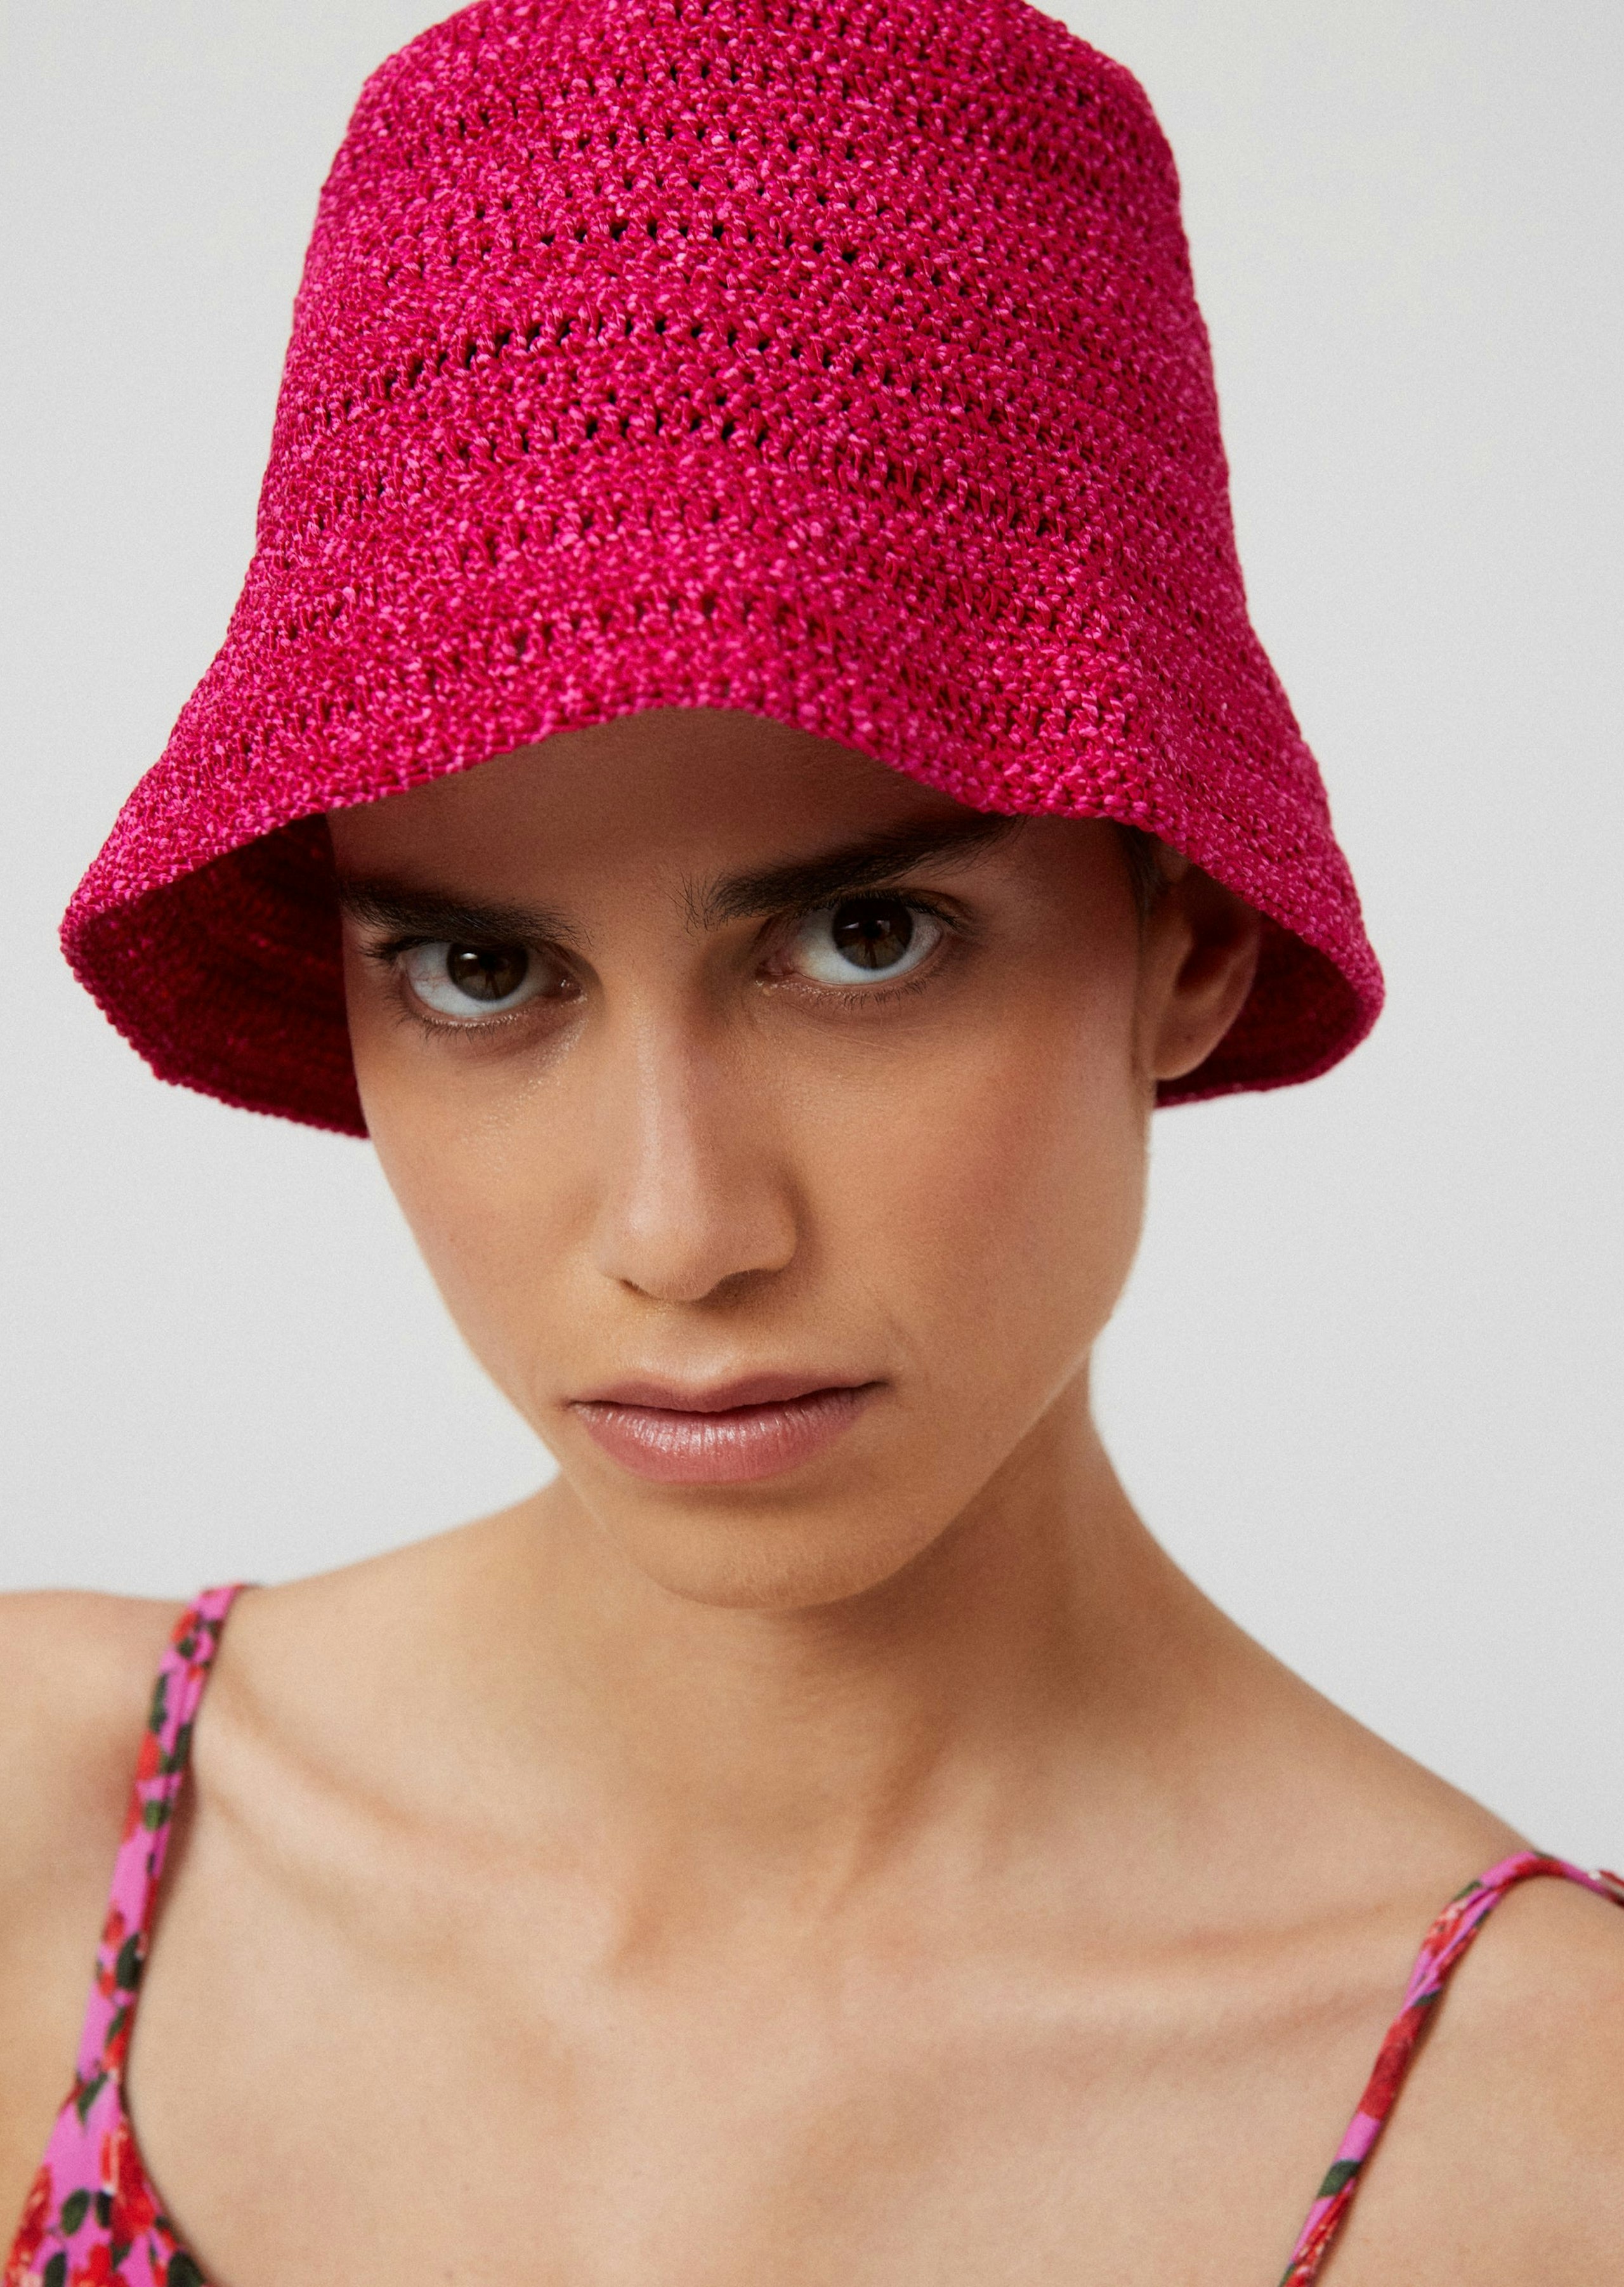 SS22 HAT 02 PINK